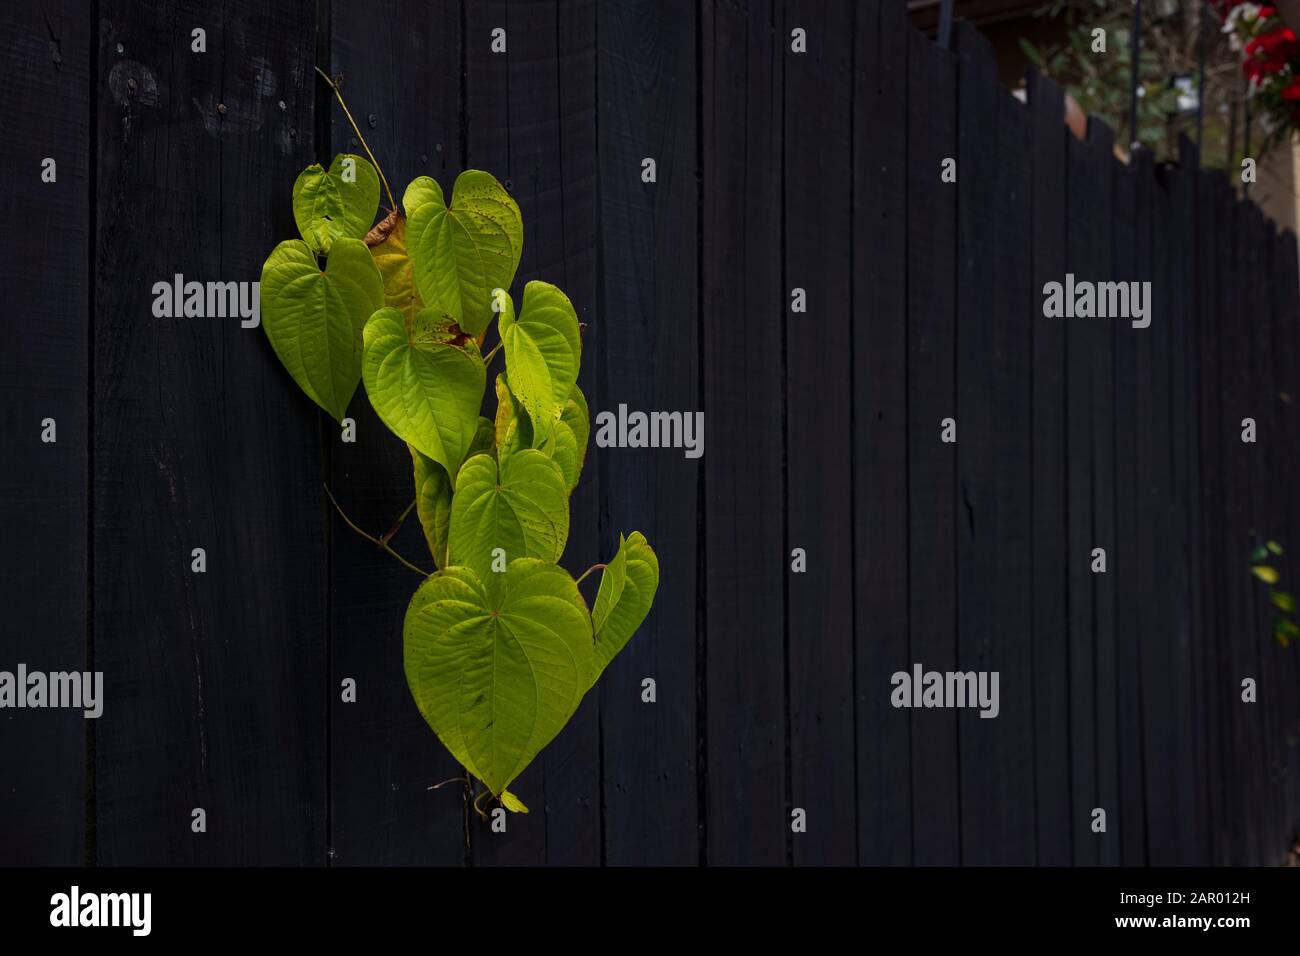 Ivy growing through a black painted, wooden privacy fence located in Florida during the winter season. Stock Photo